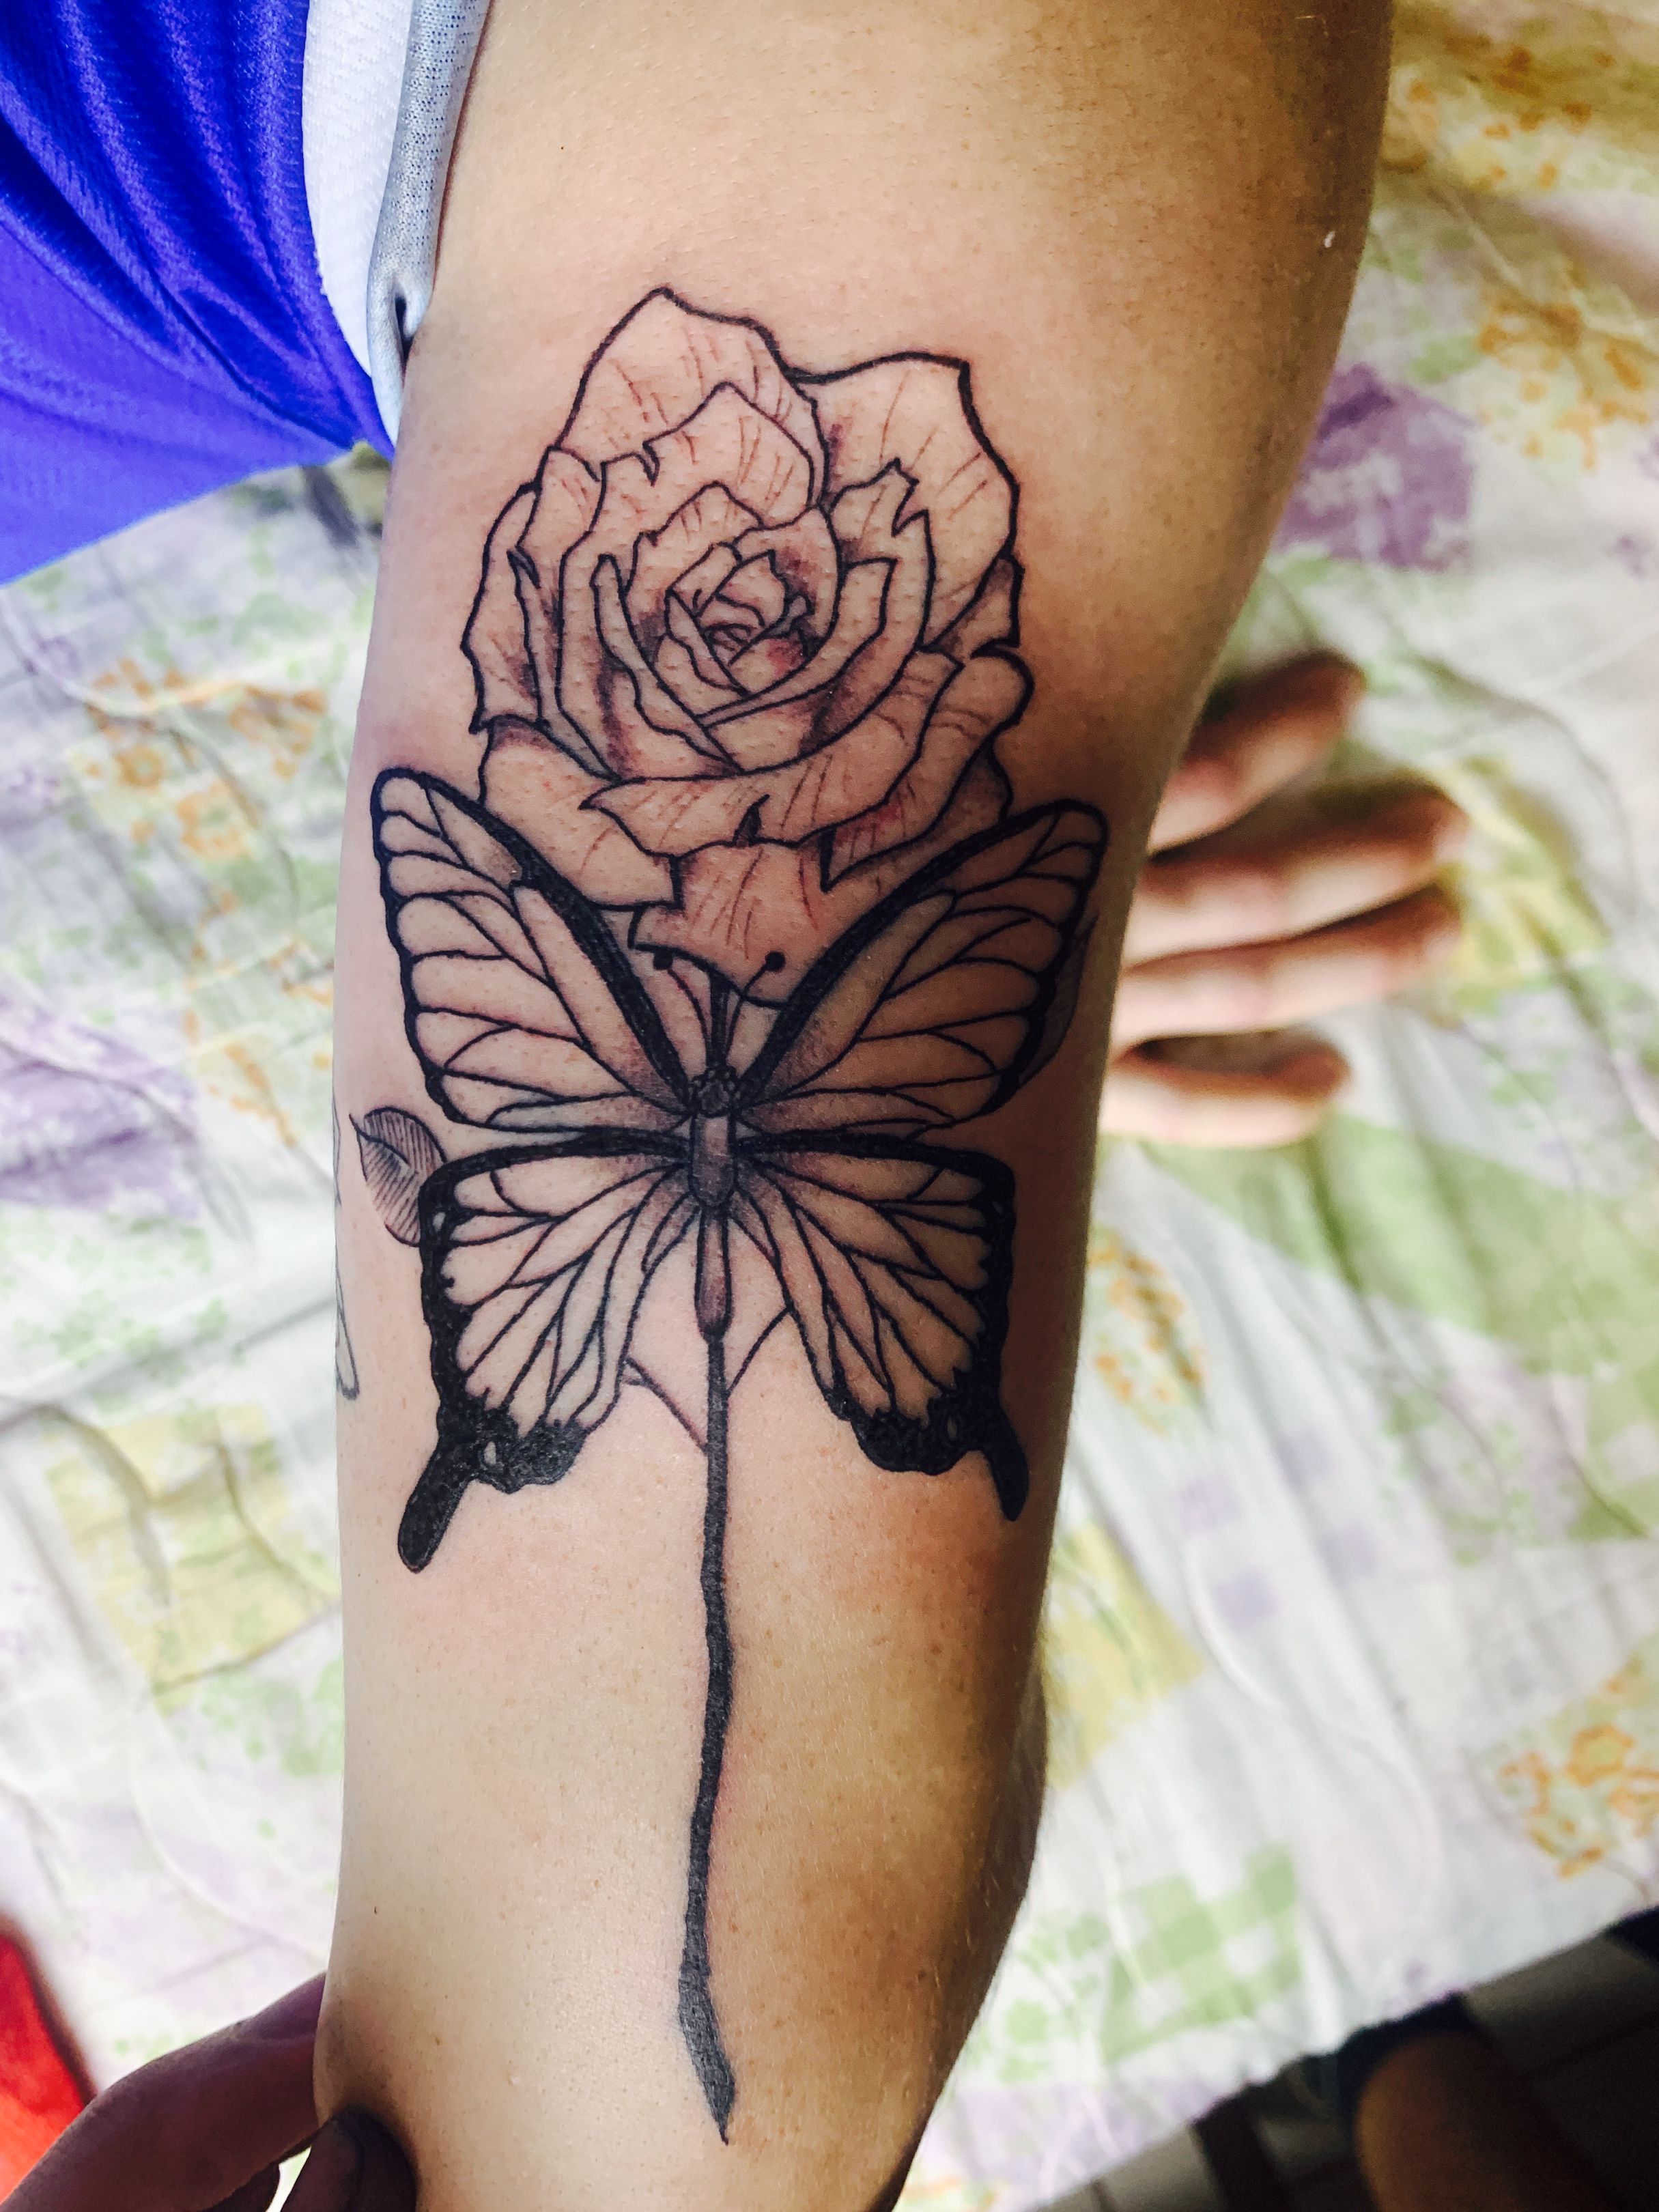 butterfly and rose tattoos designs